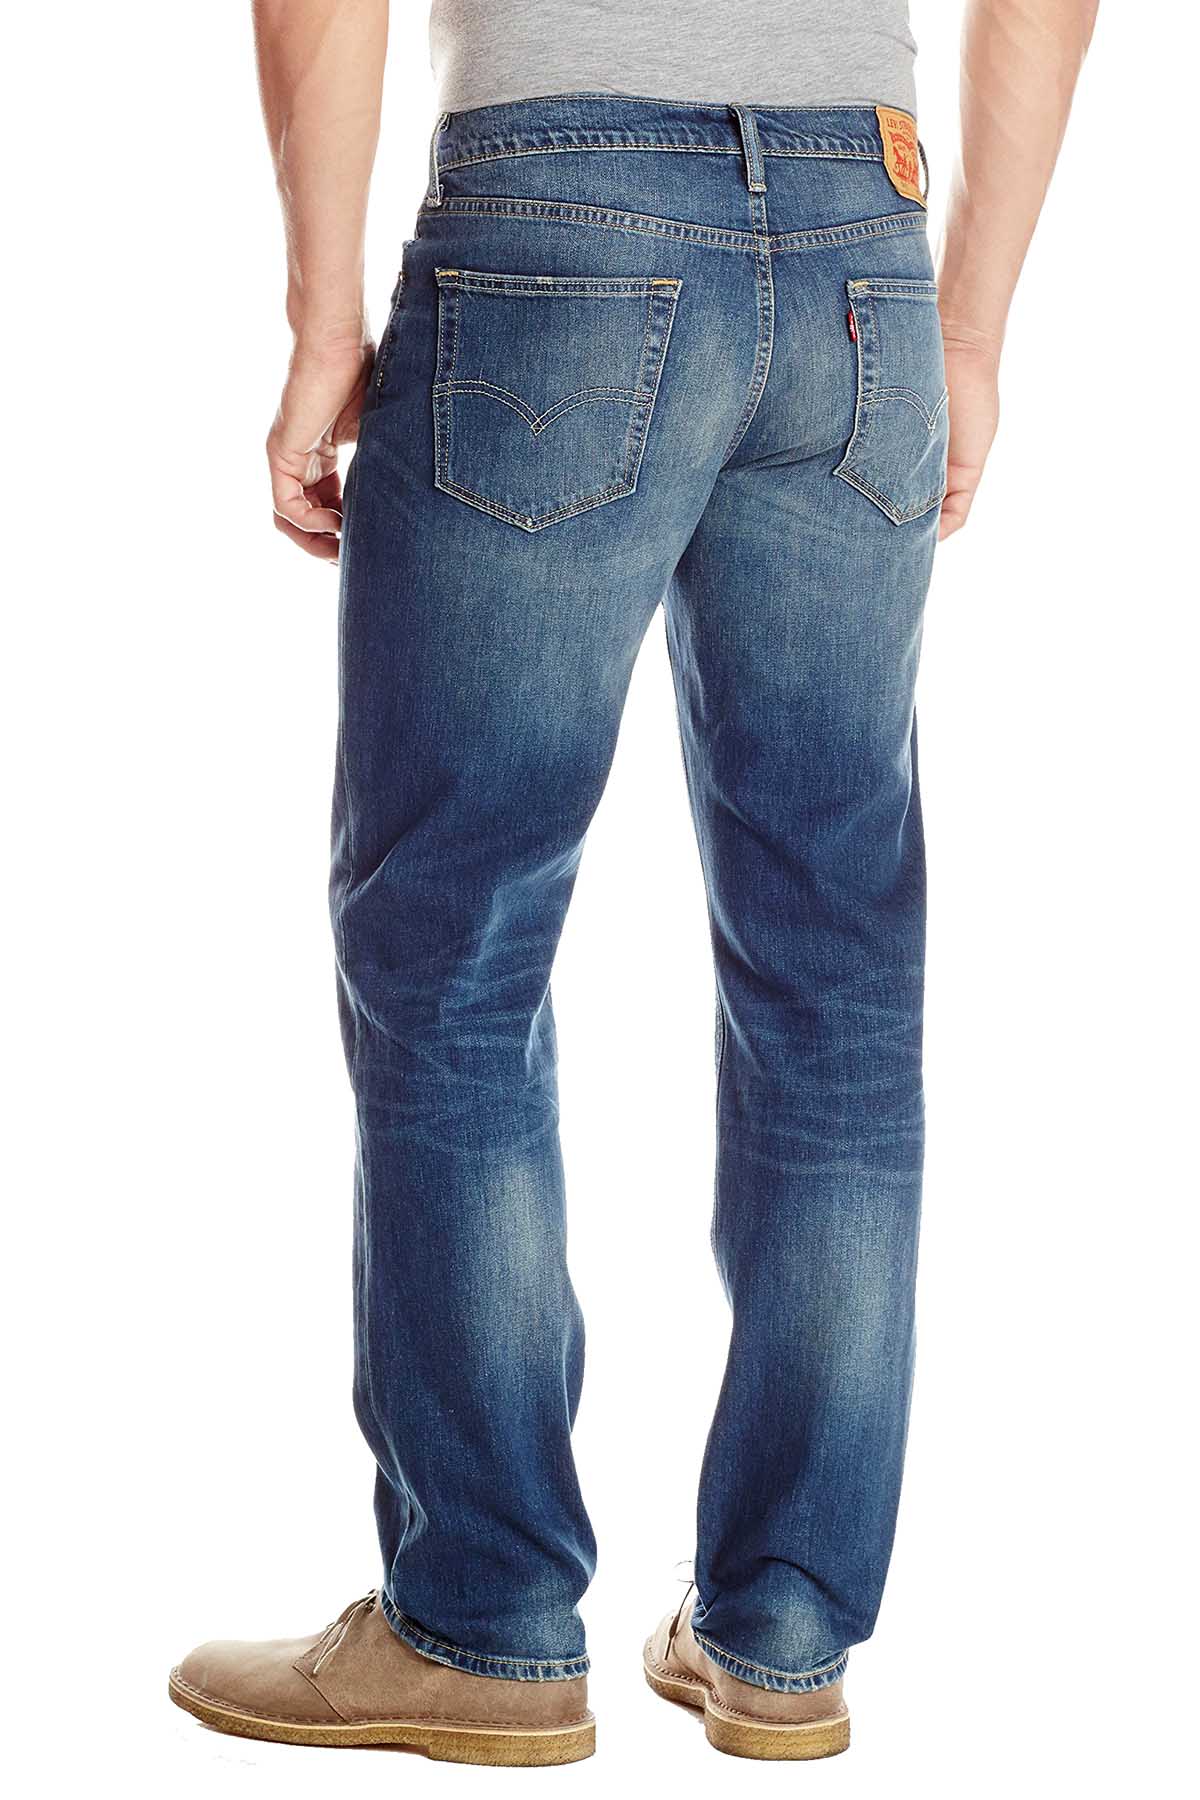 Levi's Blue Canyon 541™ Athletic Fit Jean